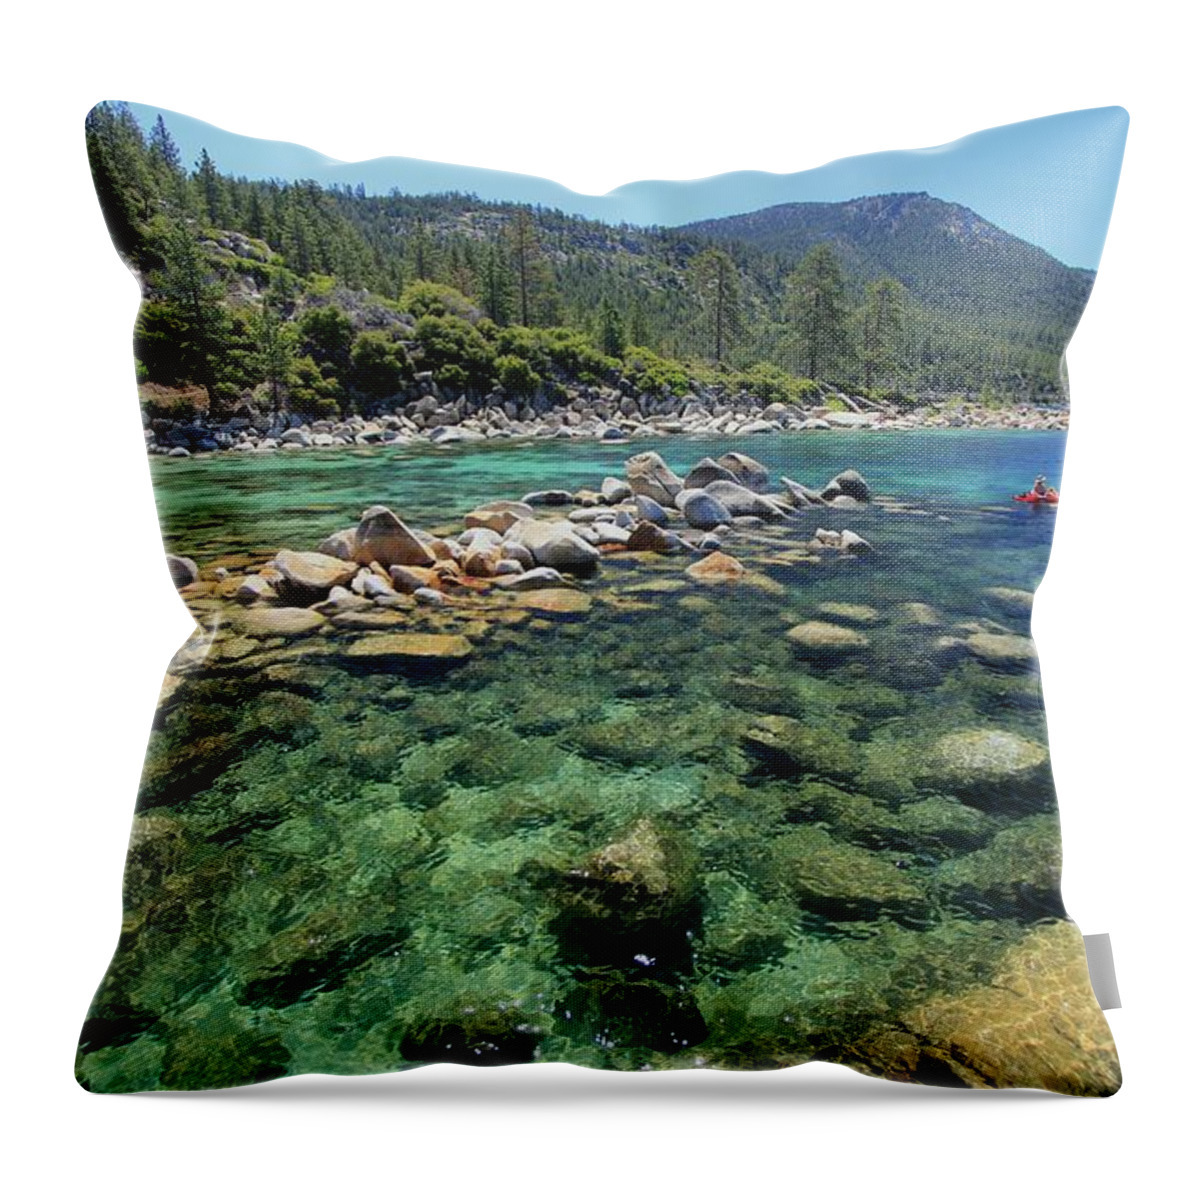 Lake Tahoe Throw Pillow featuring the photograph Summer Paddle by Sean Sarsfield